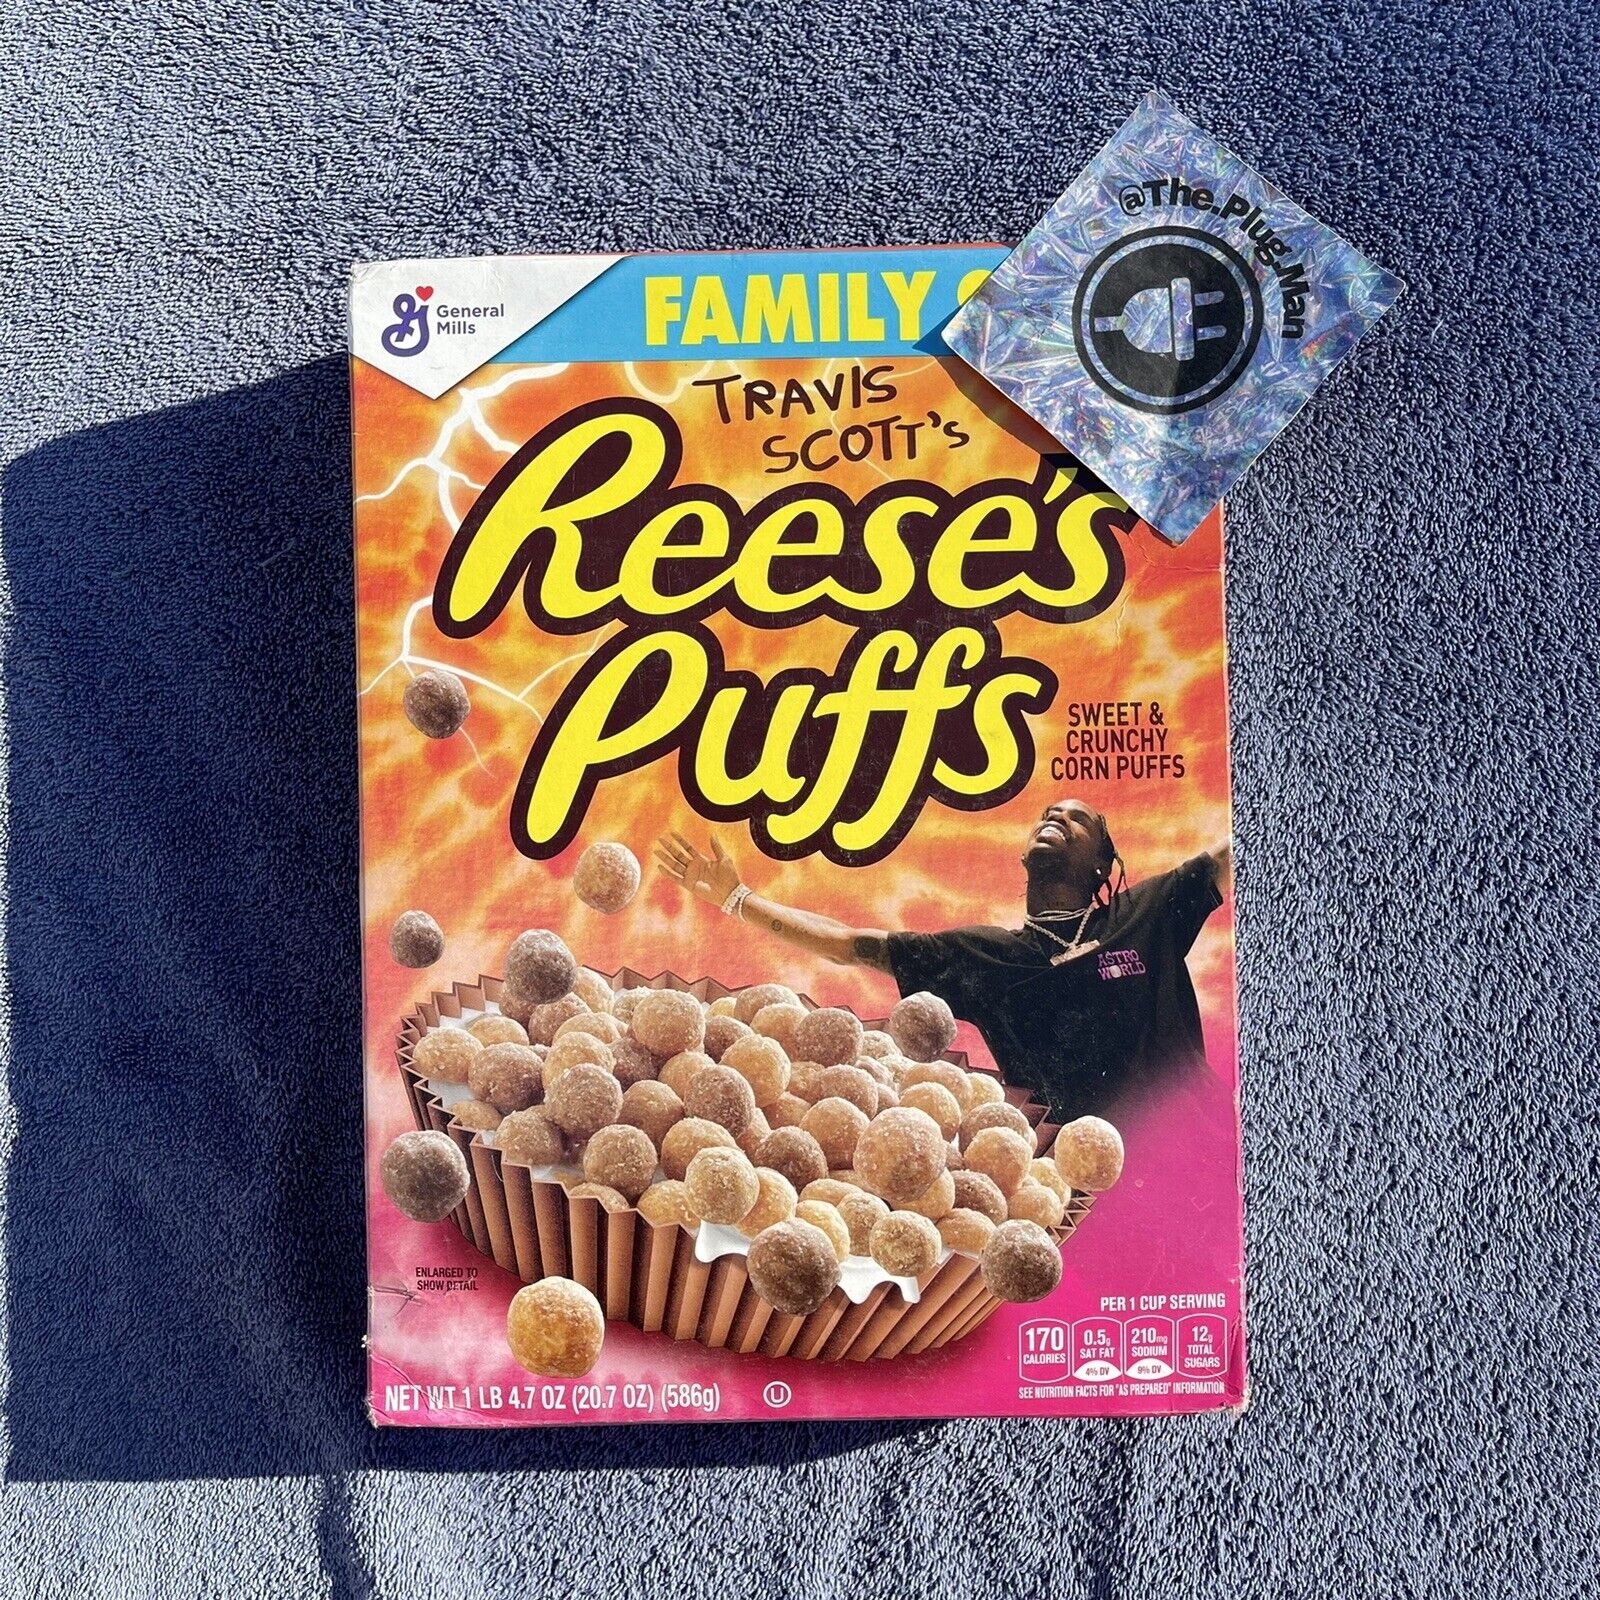 Limited Edition Travis Scott x Reeses Puffs Cereal - Family Size